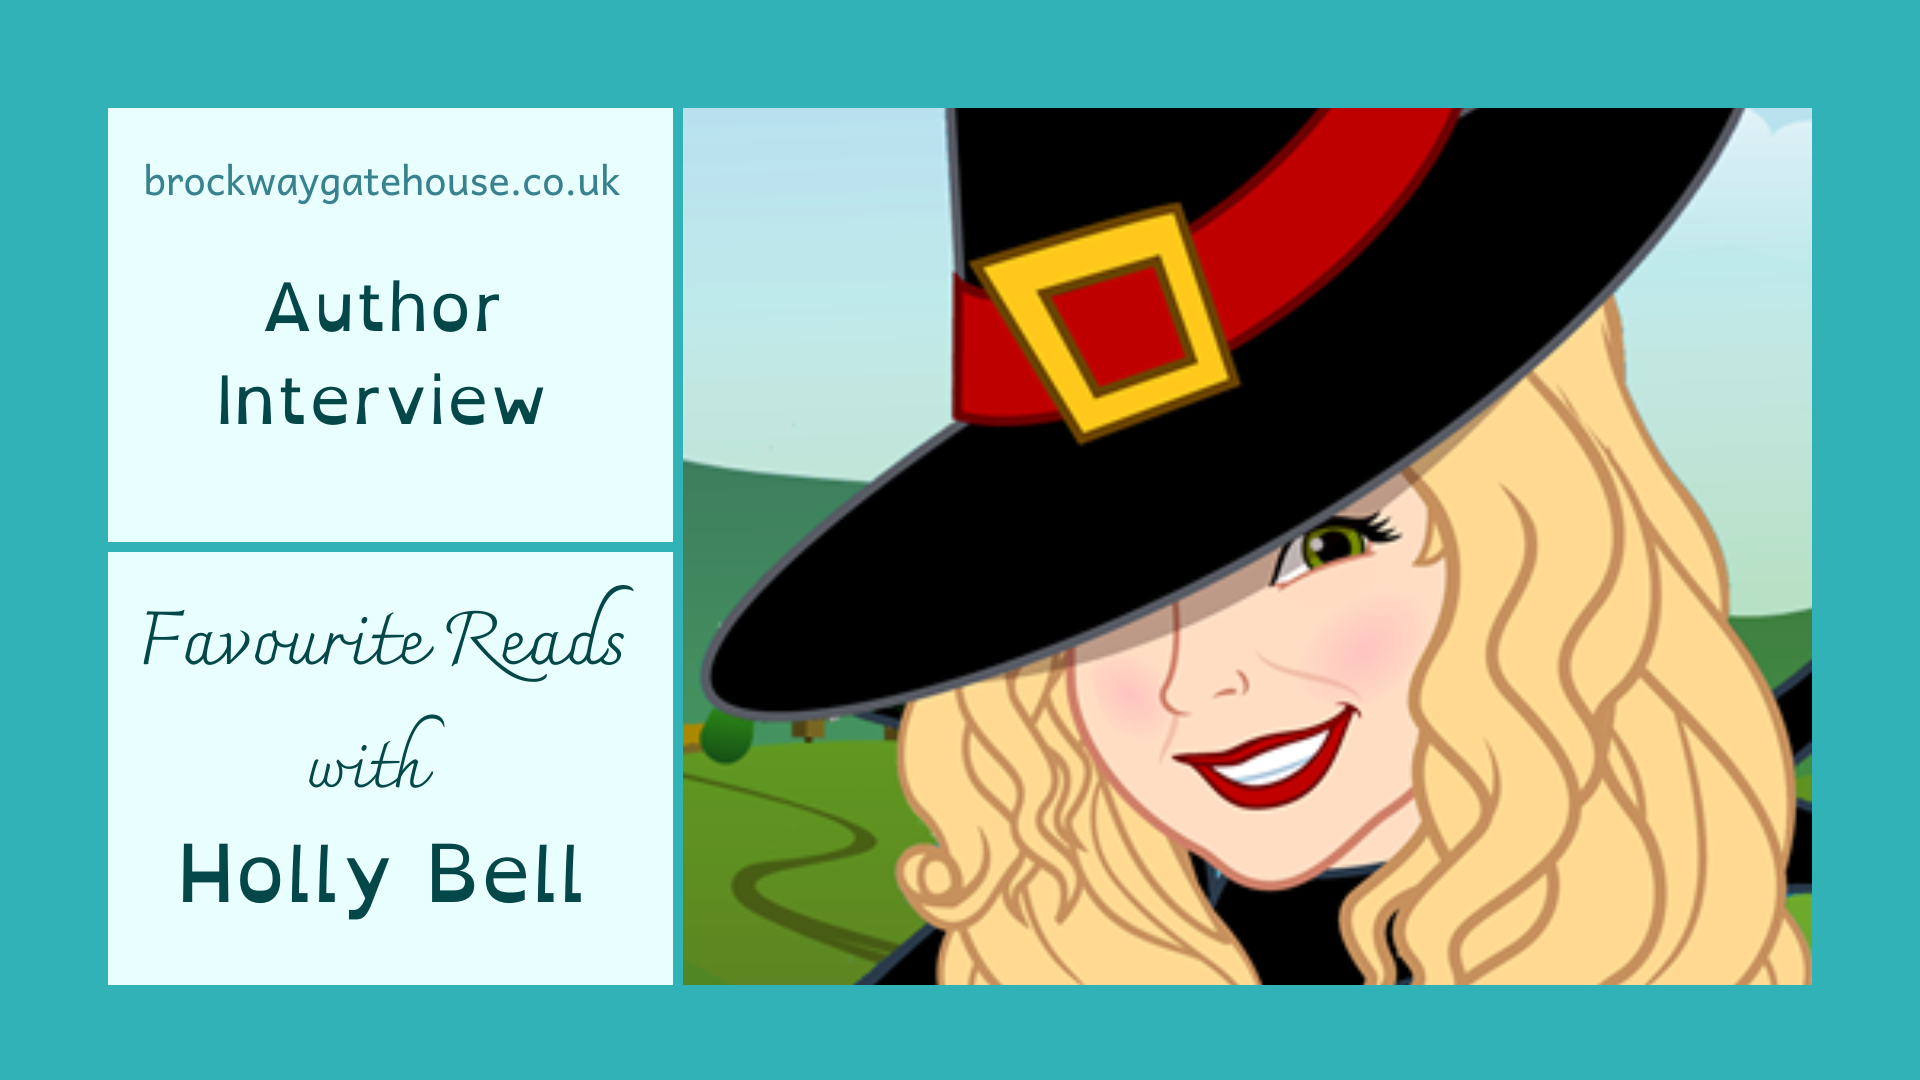 Turquoise background with author logo on right. Text reads Author interview. Favourite reads with Holly Bell.